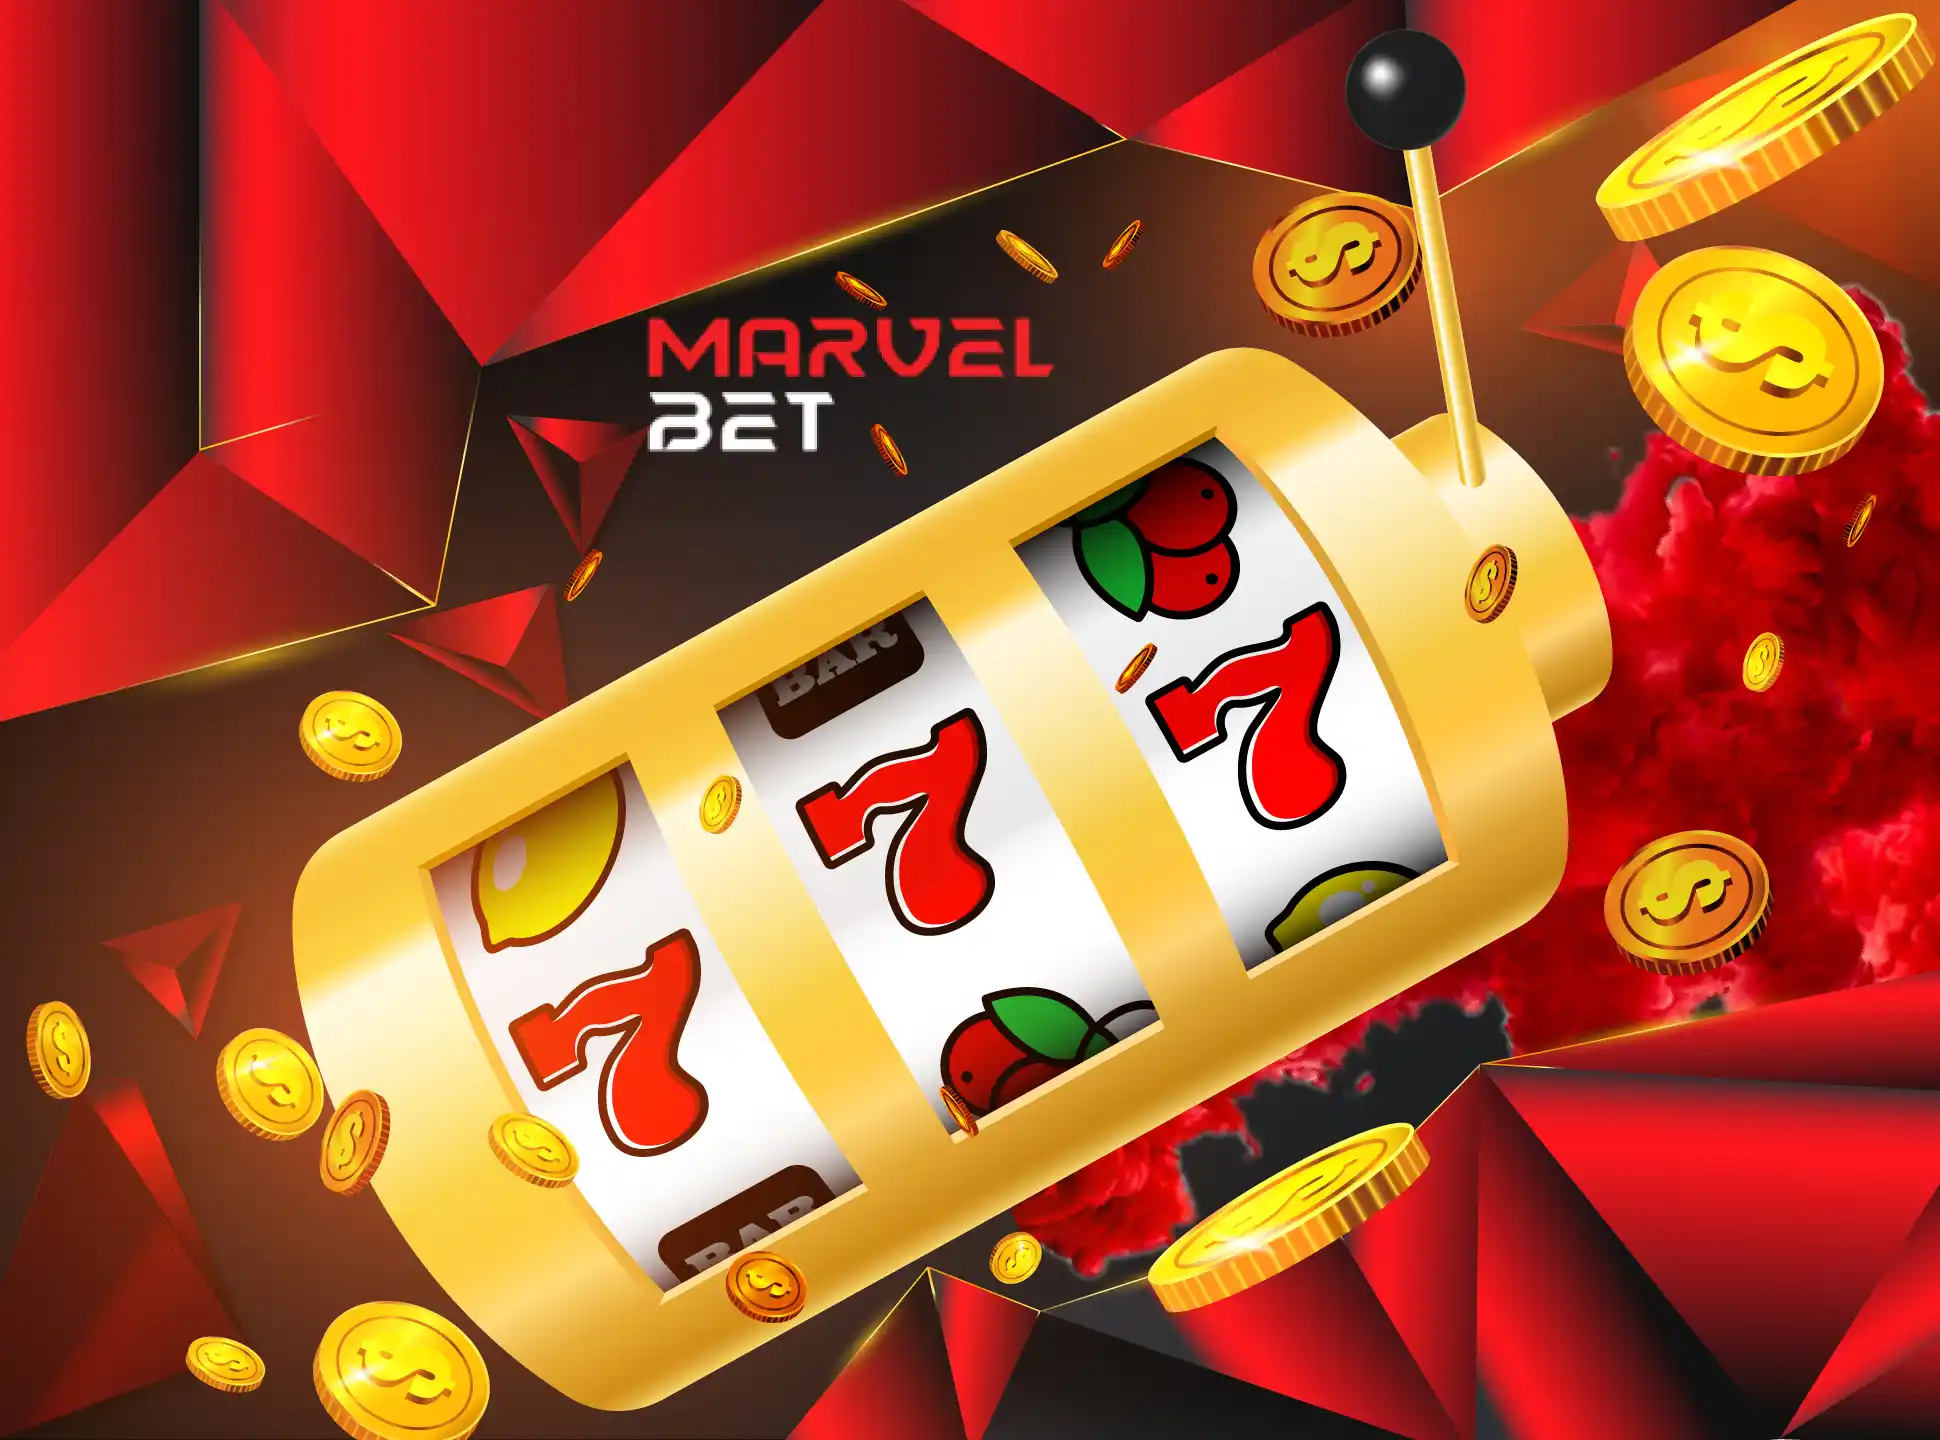 There are numerous slots from different providers at MarvelBet.